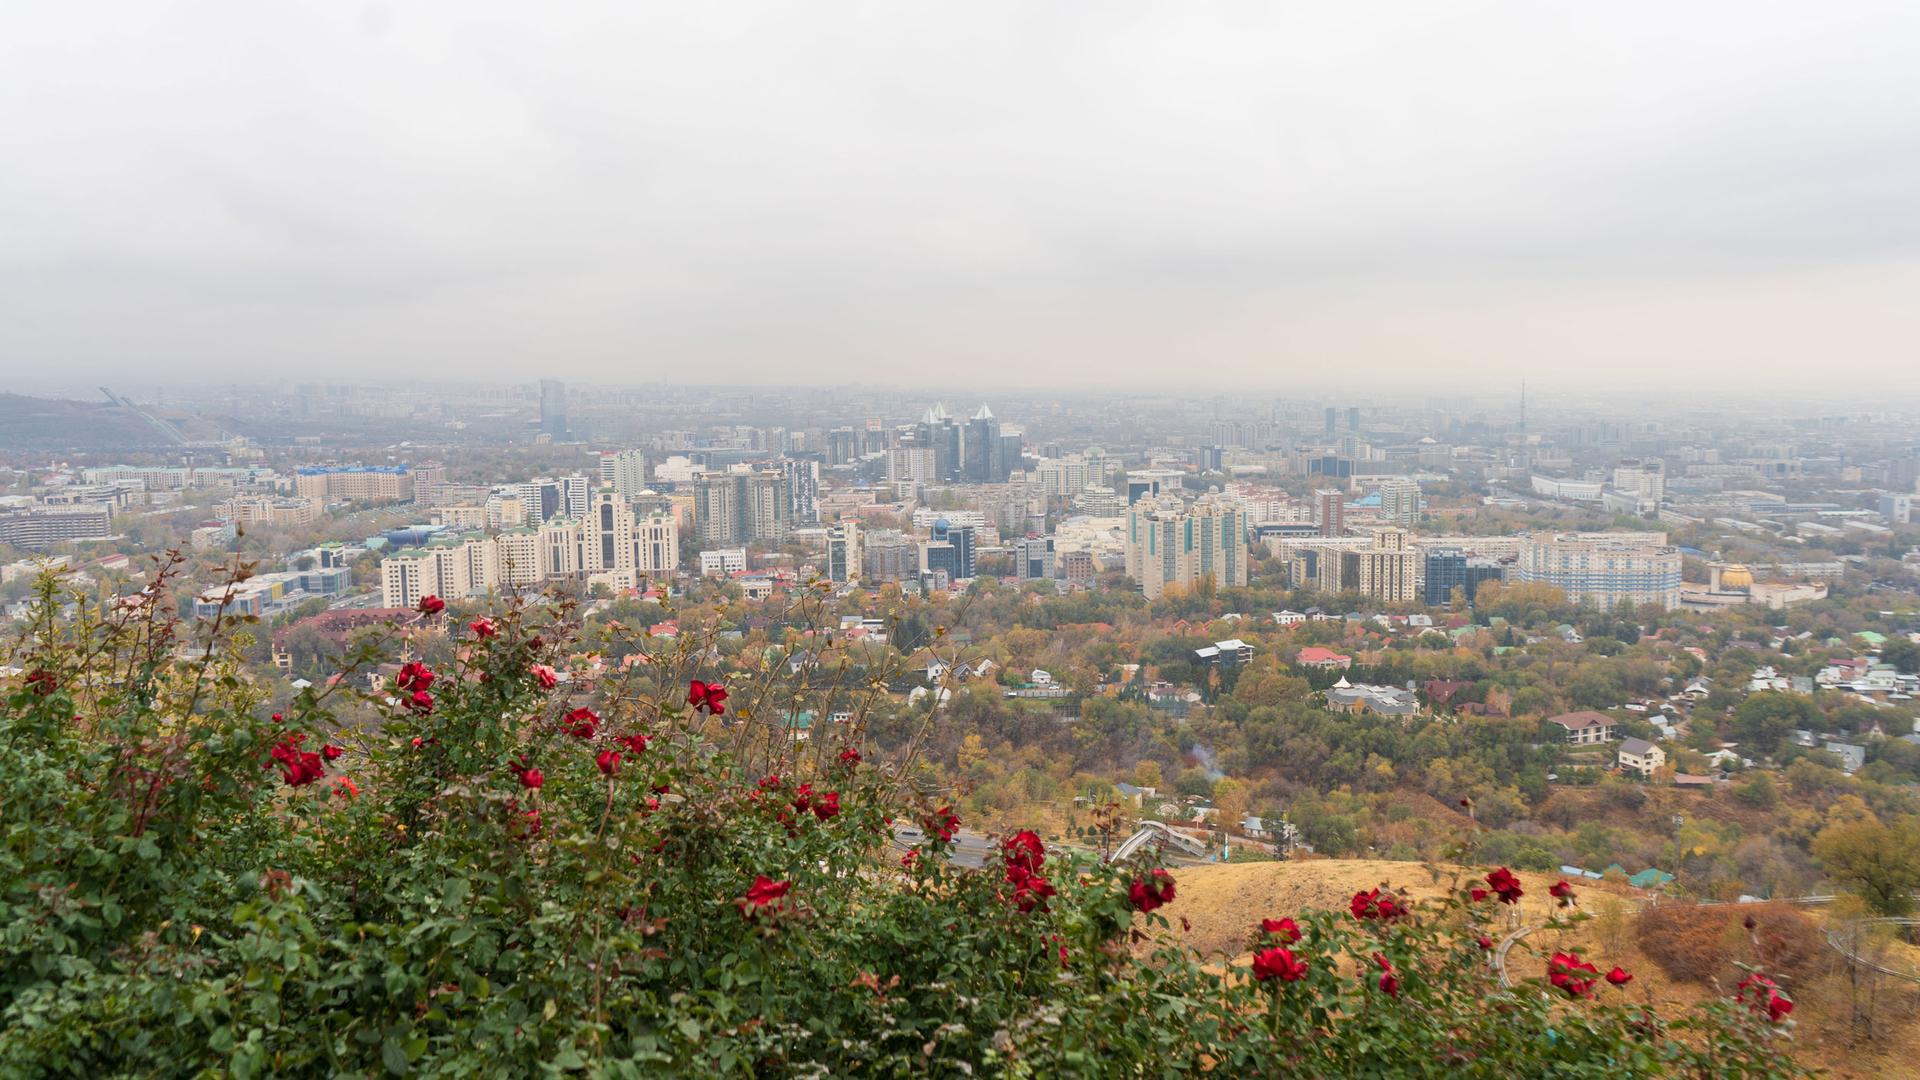 A view of Almaty from Kok Tobe Park, a popular hilltop tourist attraction accessible by cable car.